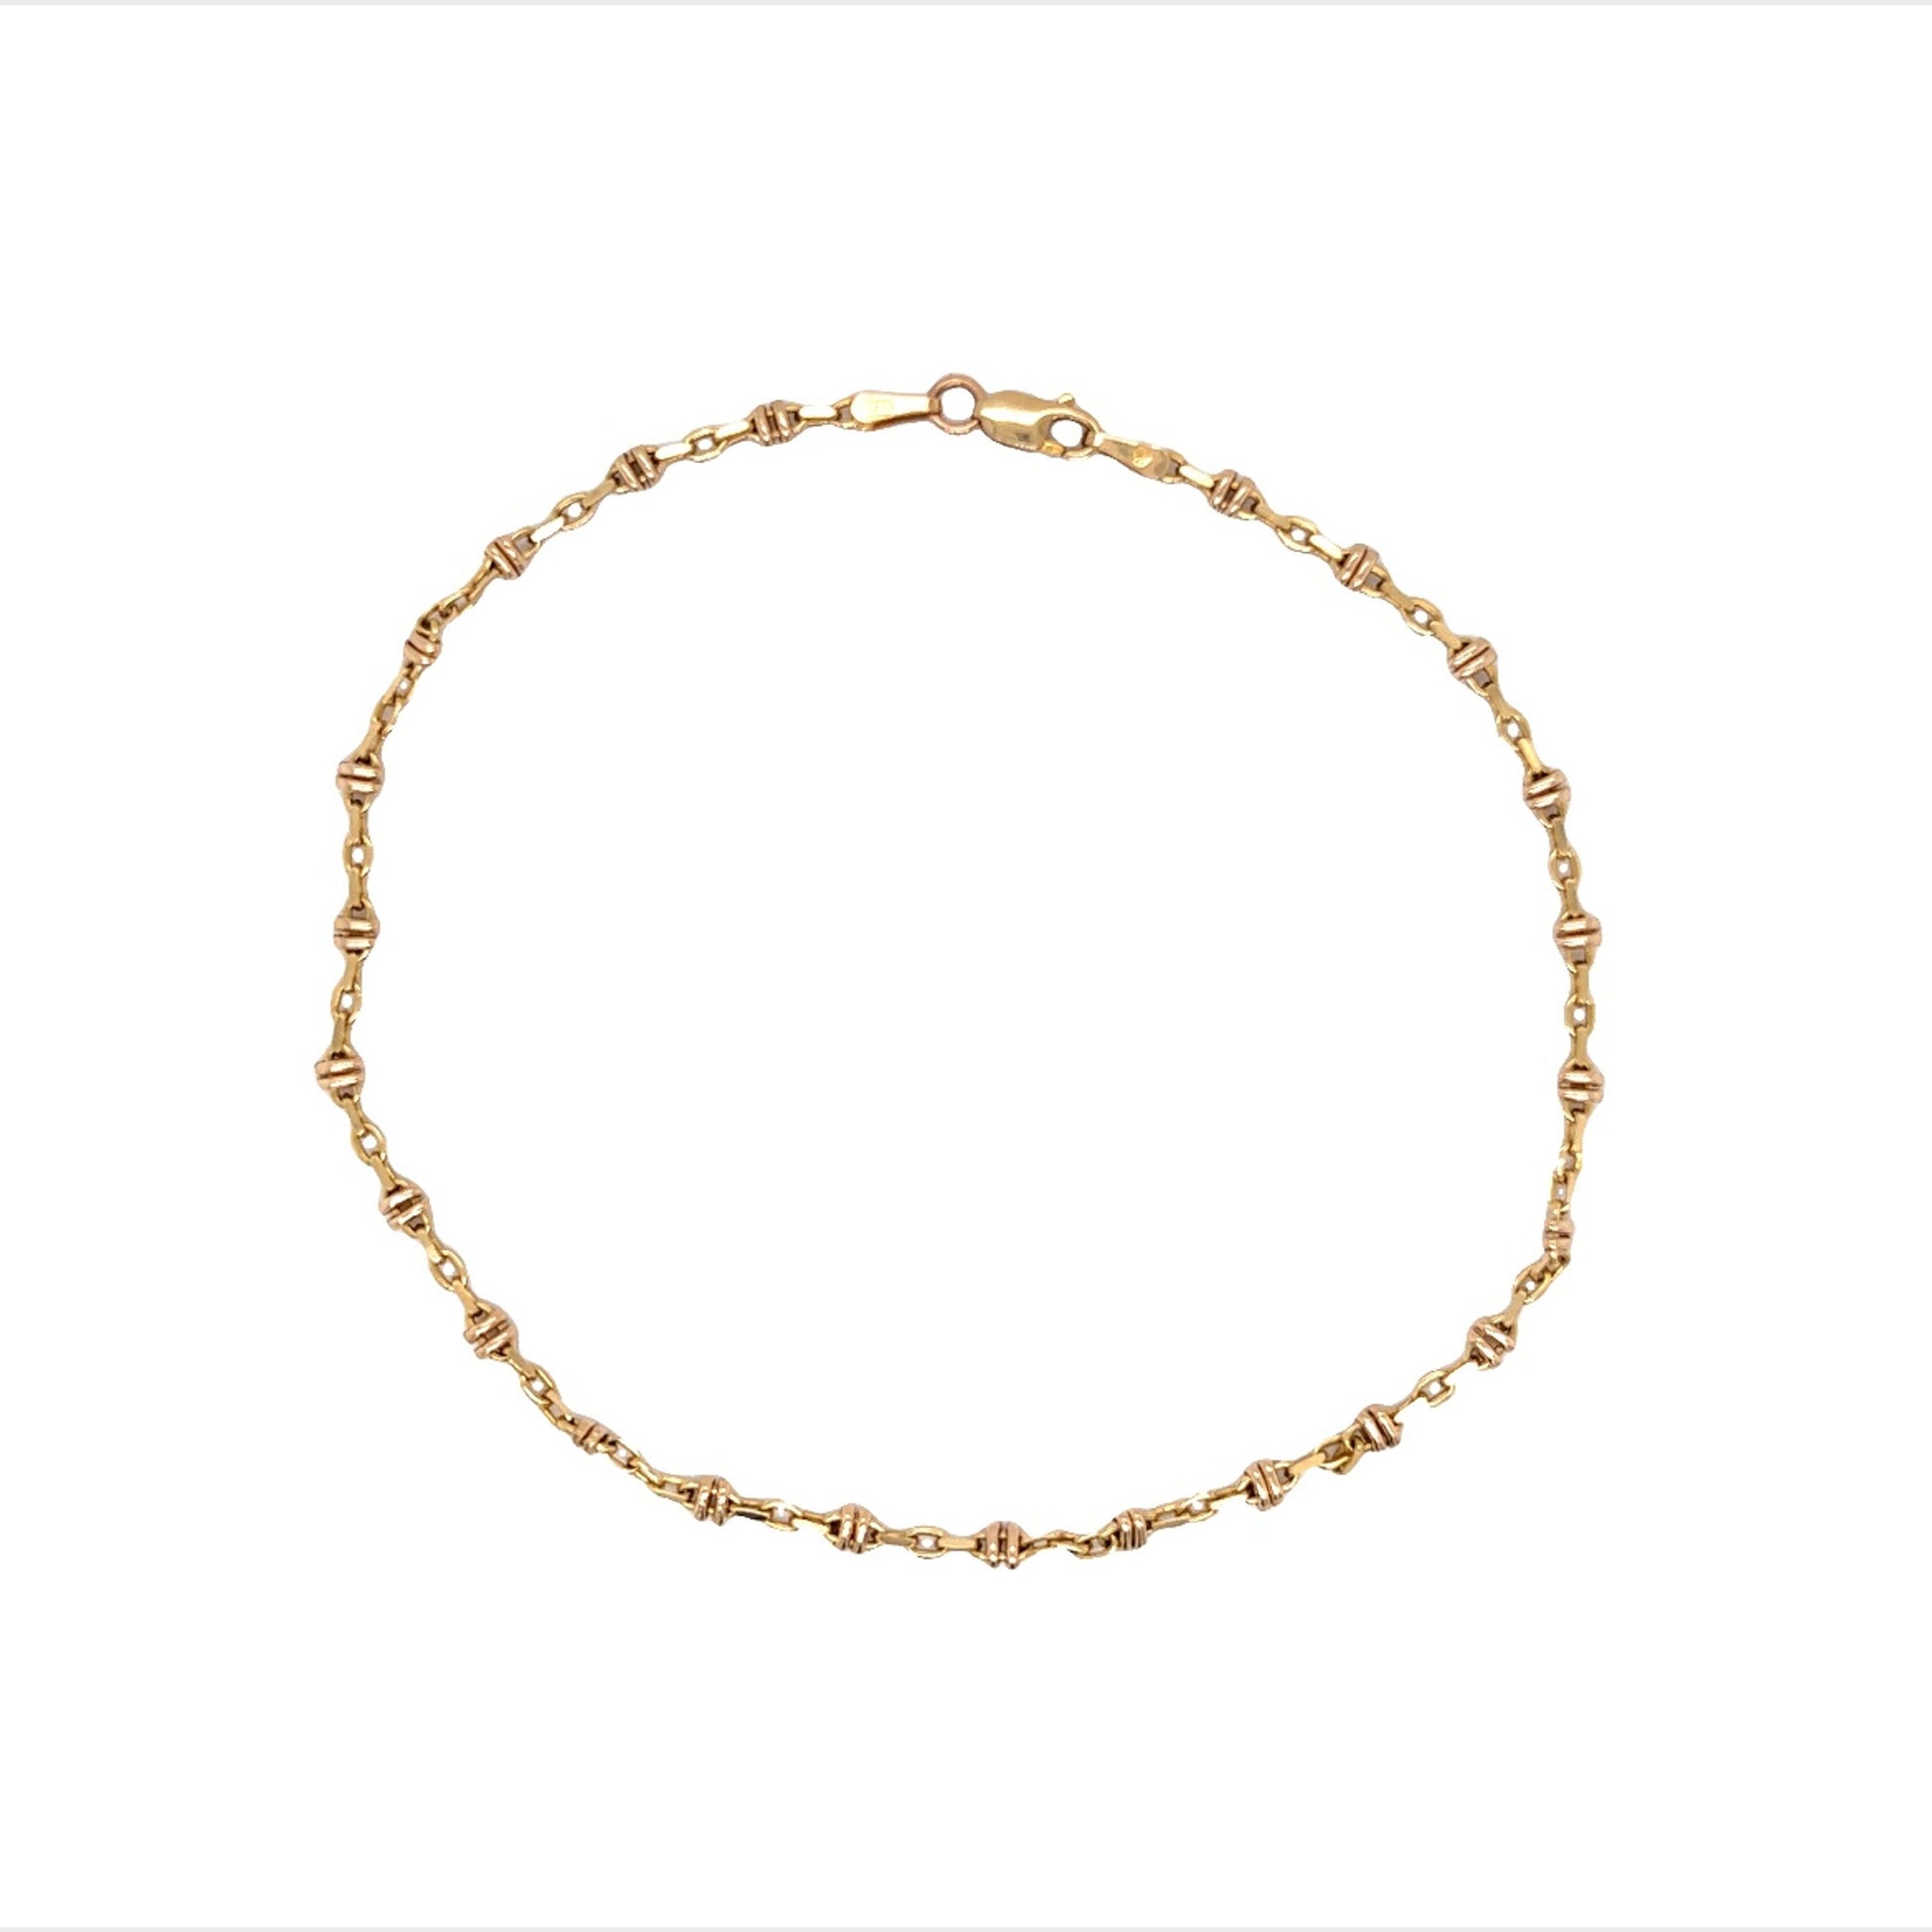 Modern Chain Link Anklet in 14k Yellow Gold